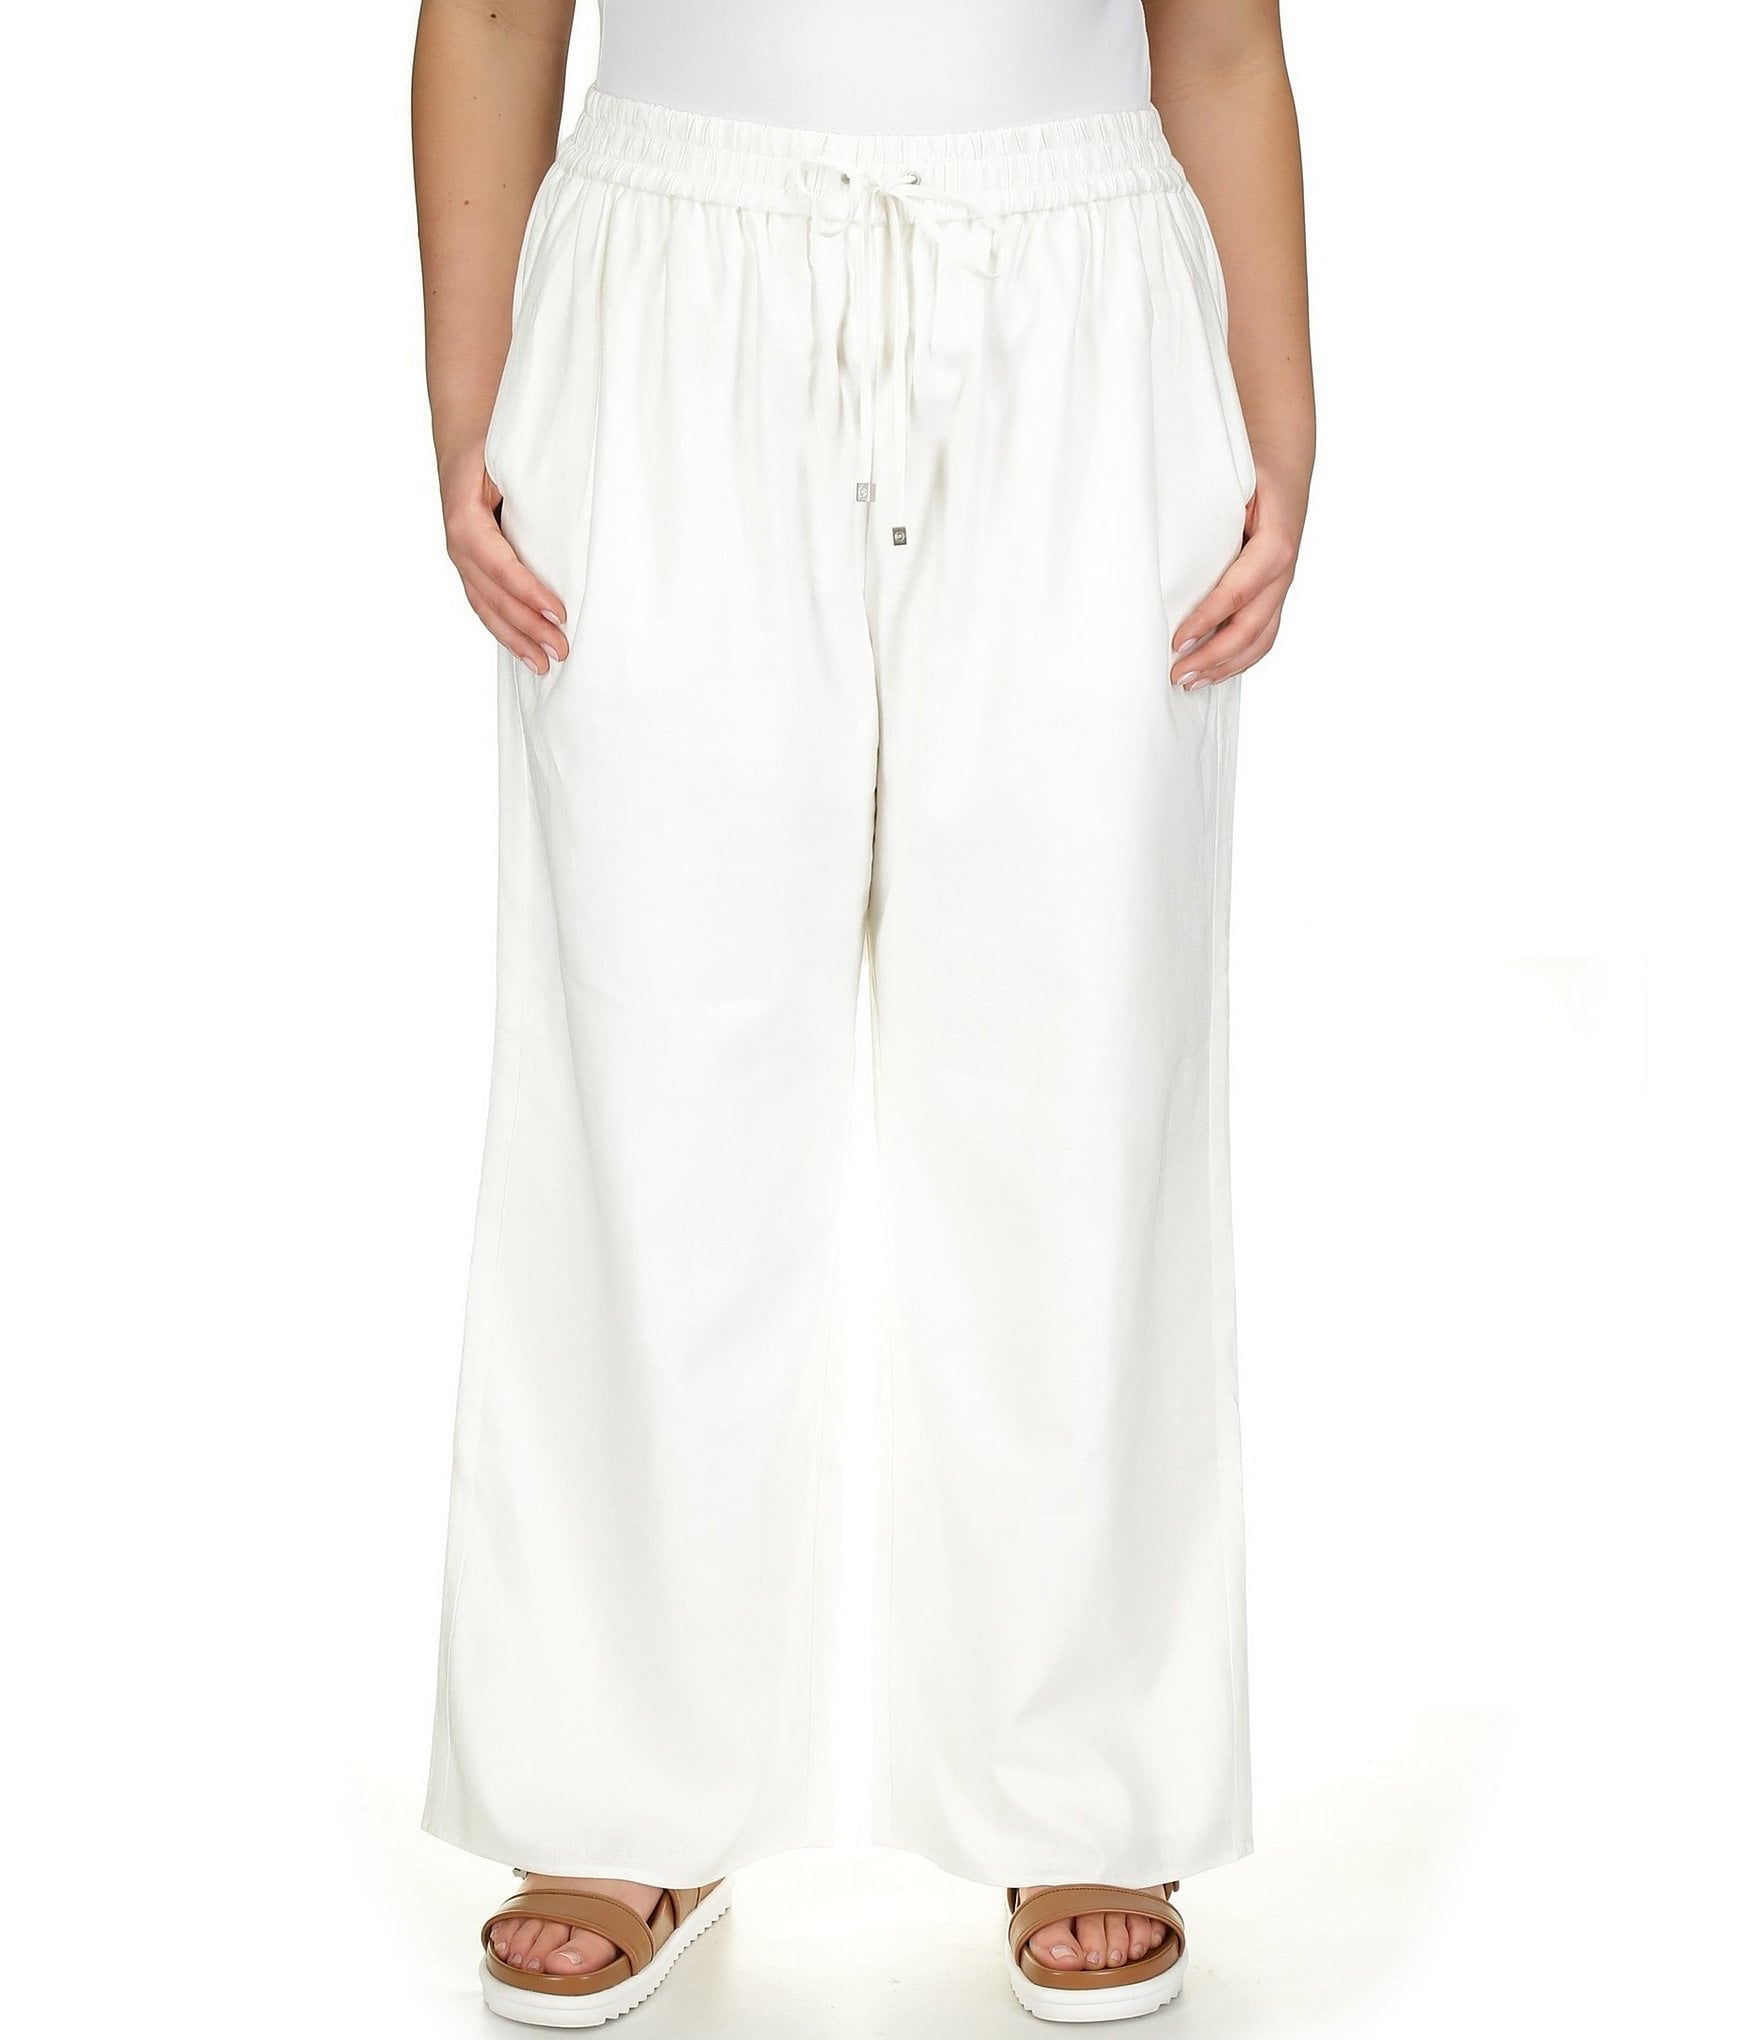 Buy In The Style women plus size cotton blend drawstring pants ivory Online